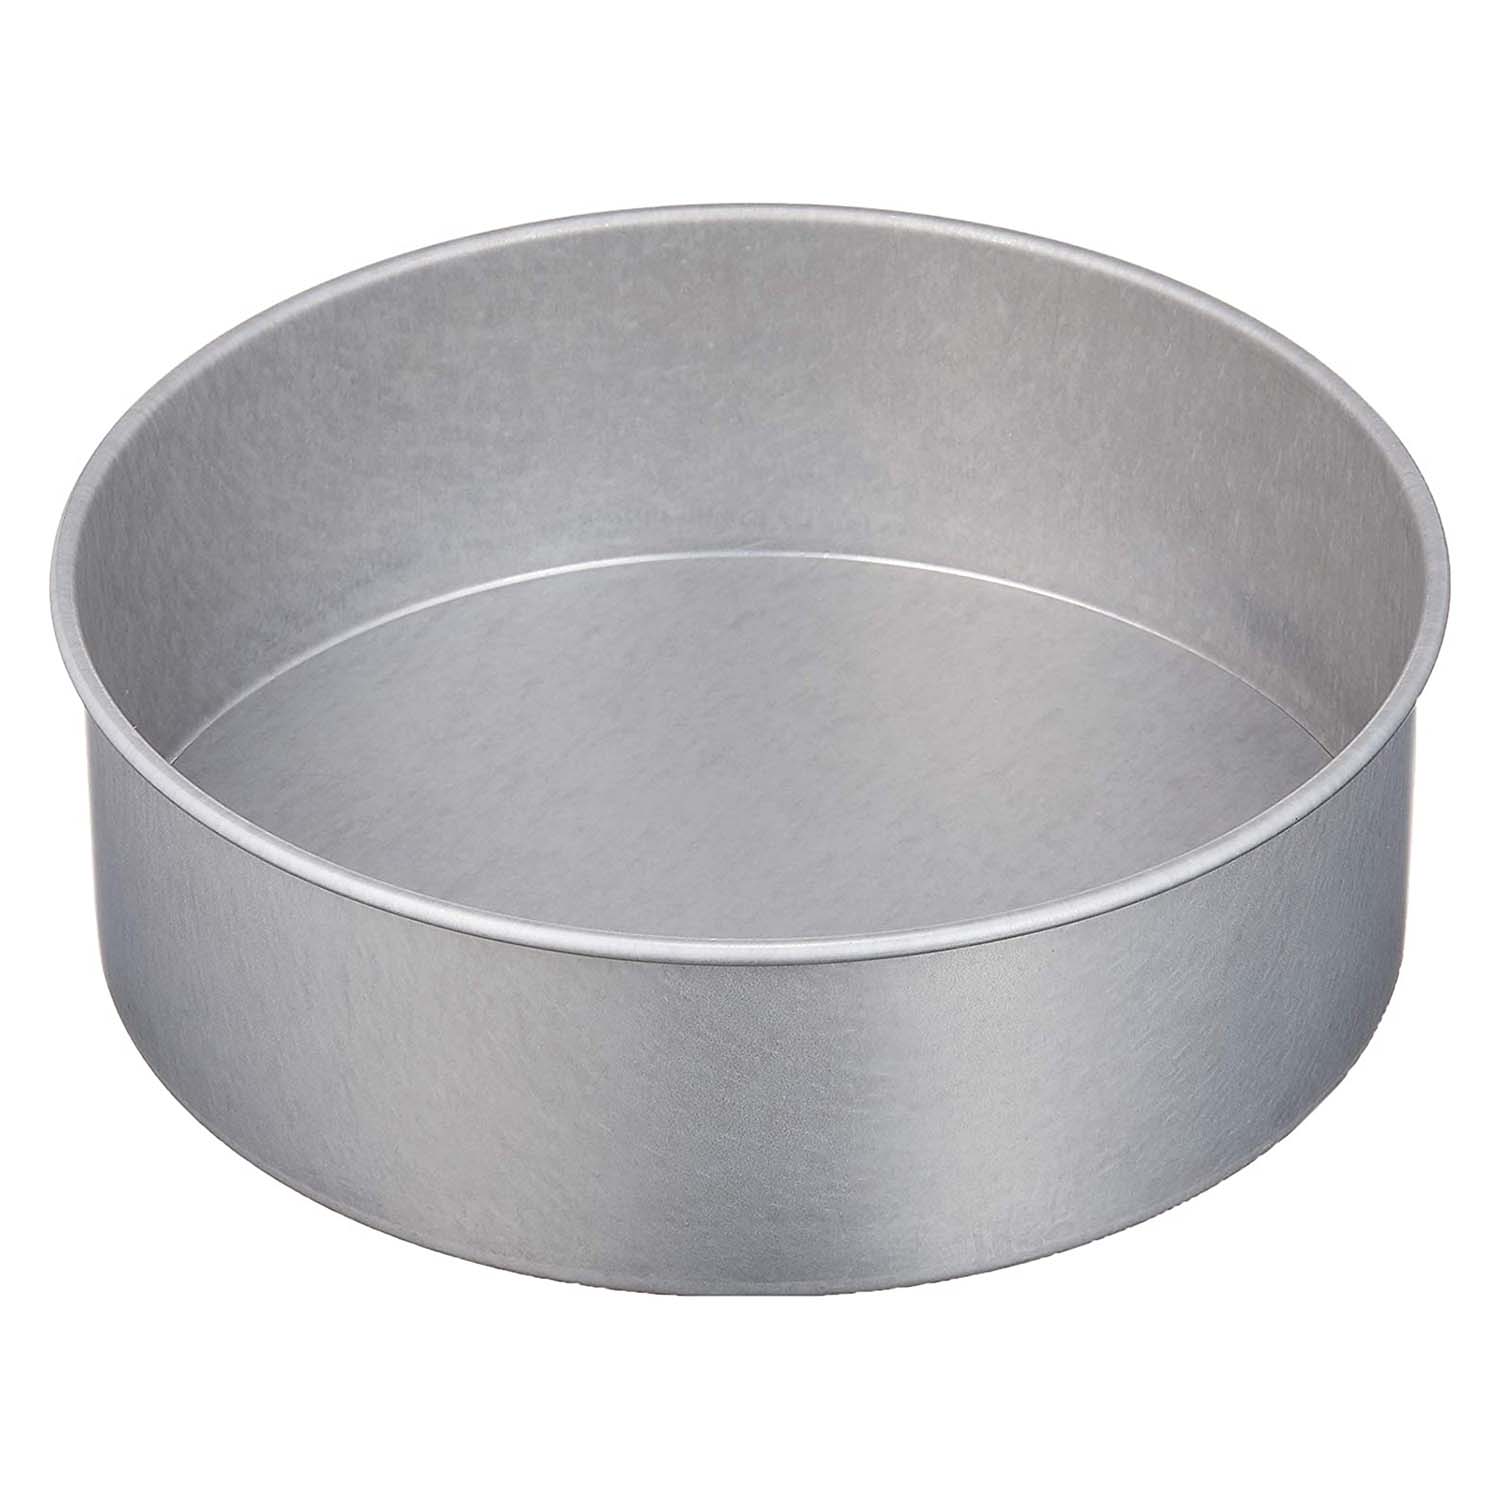 Cake Pans - Bakeware - The Home Depot